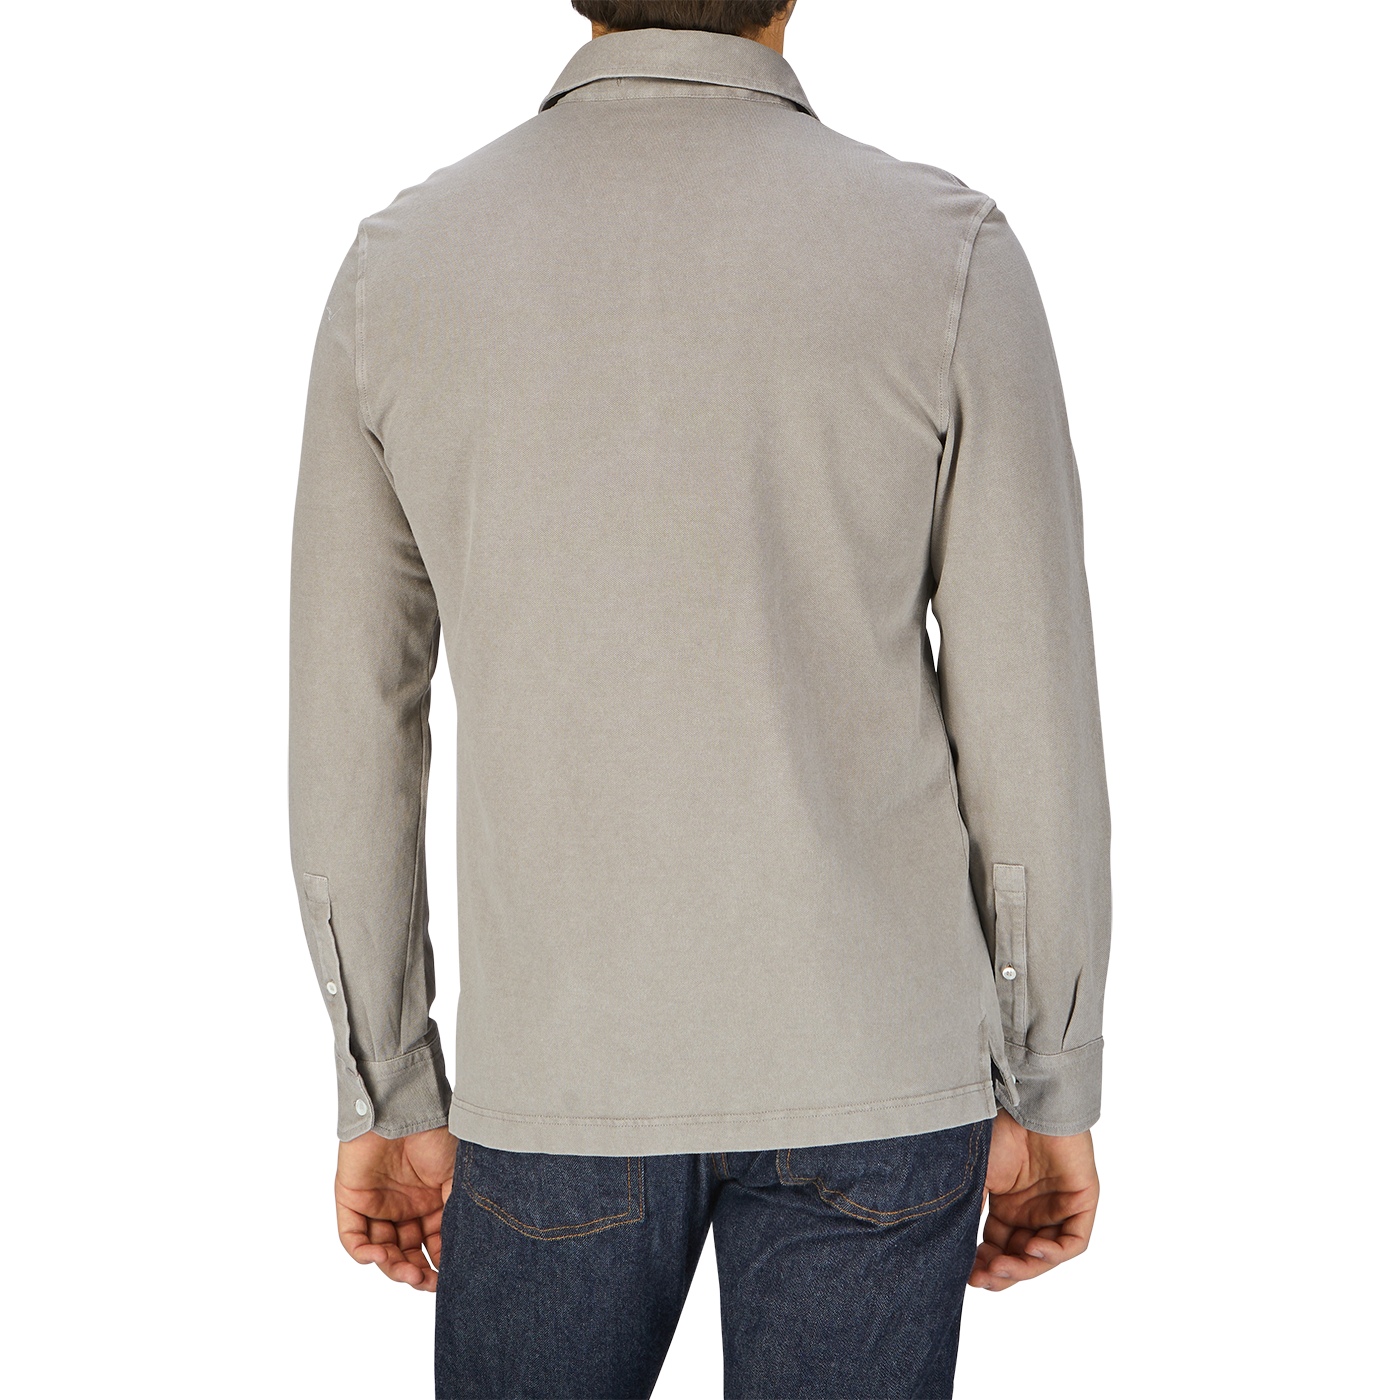 The man is wearing a grey Drumohr Taupe Beige Cotton Piquet LS polo shirt and jeans.